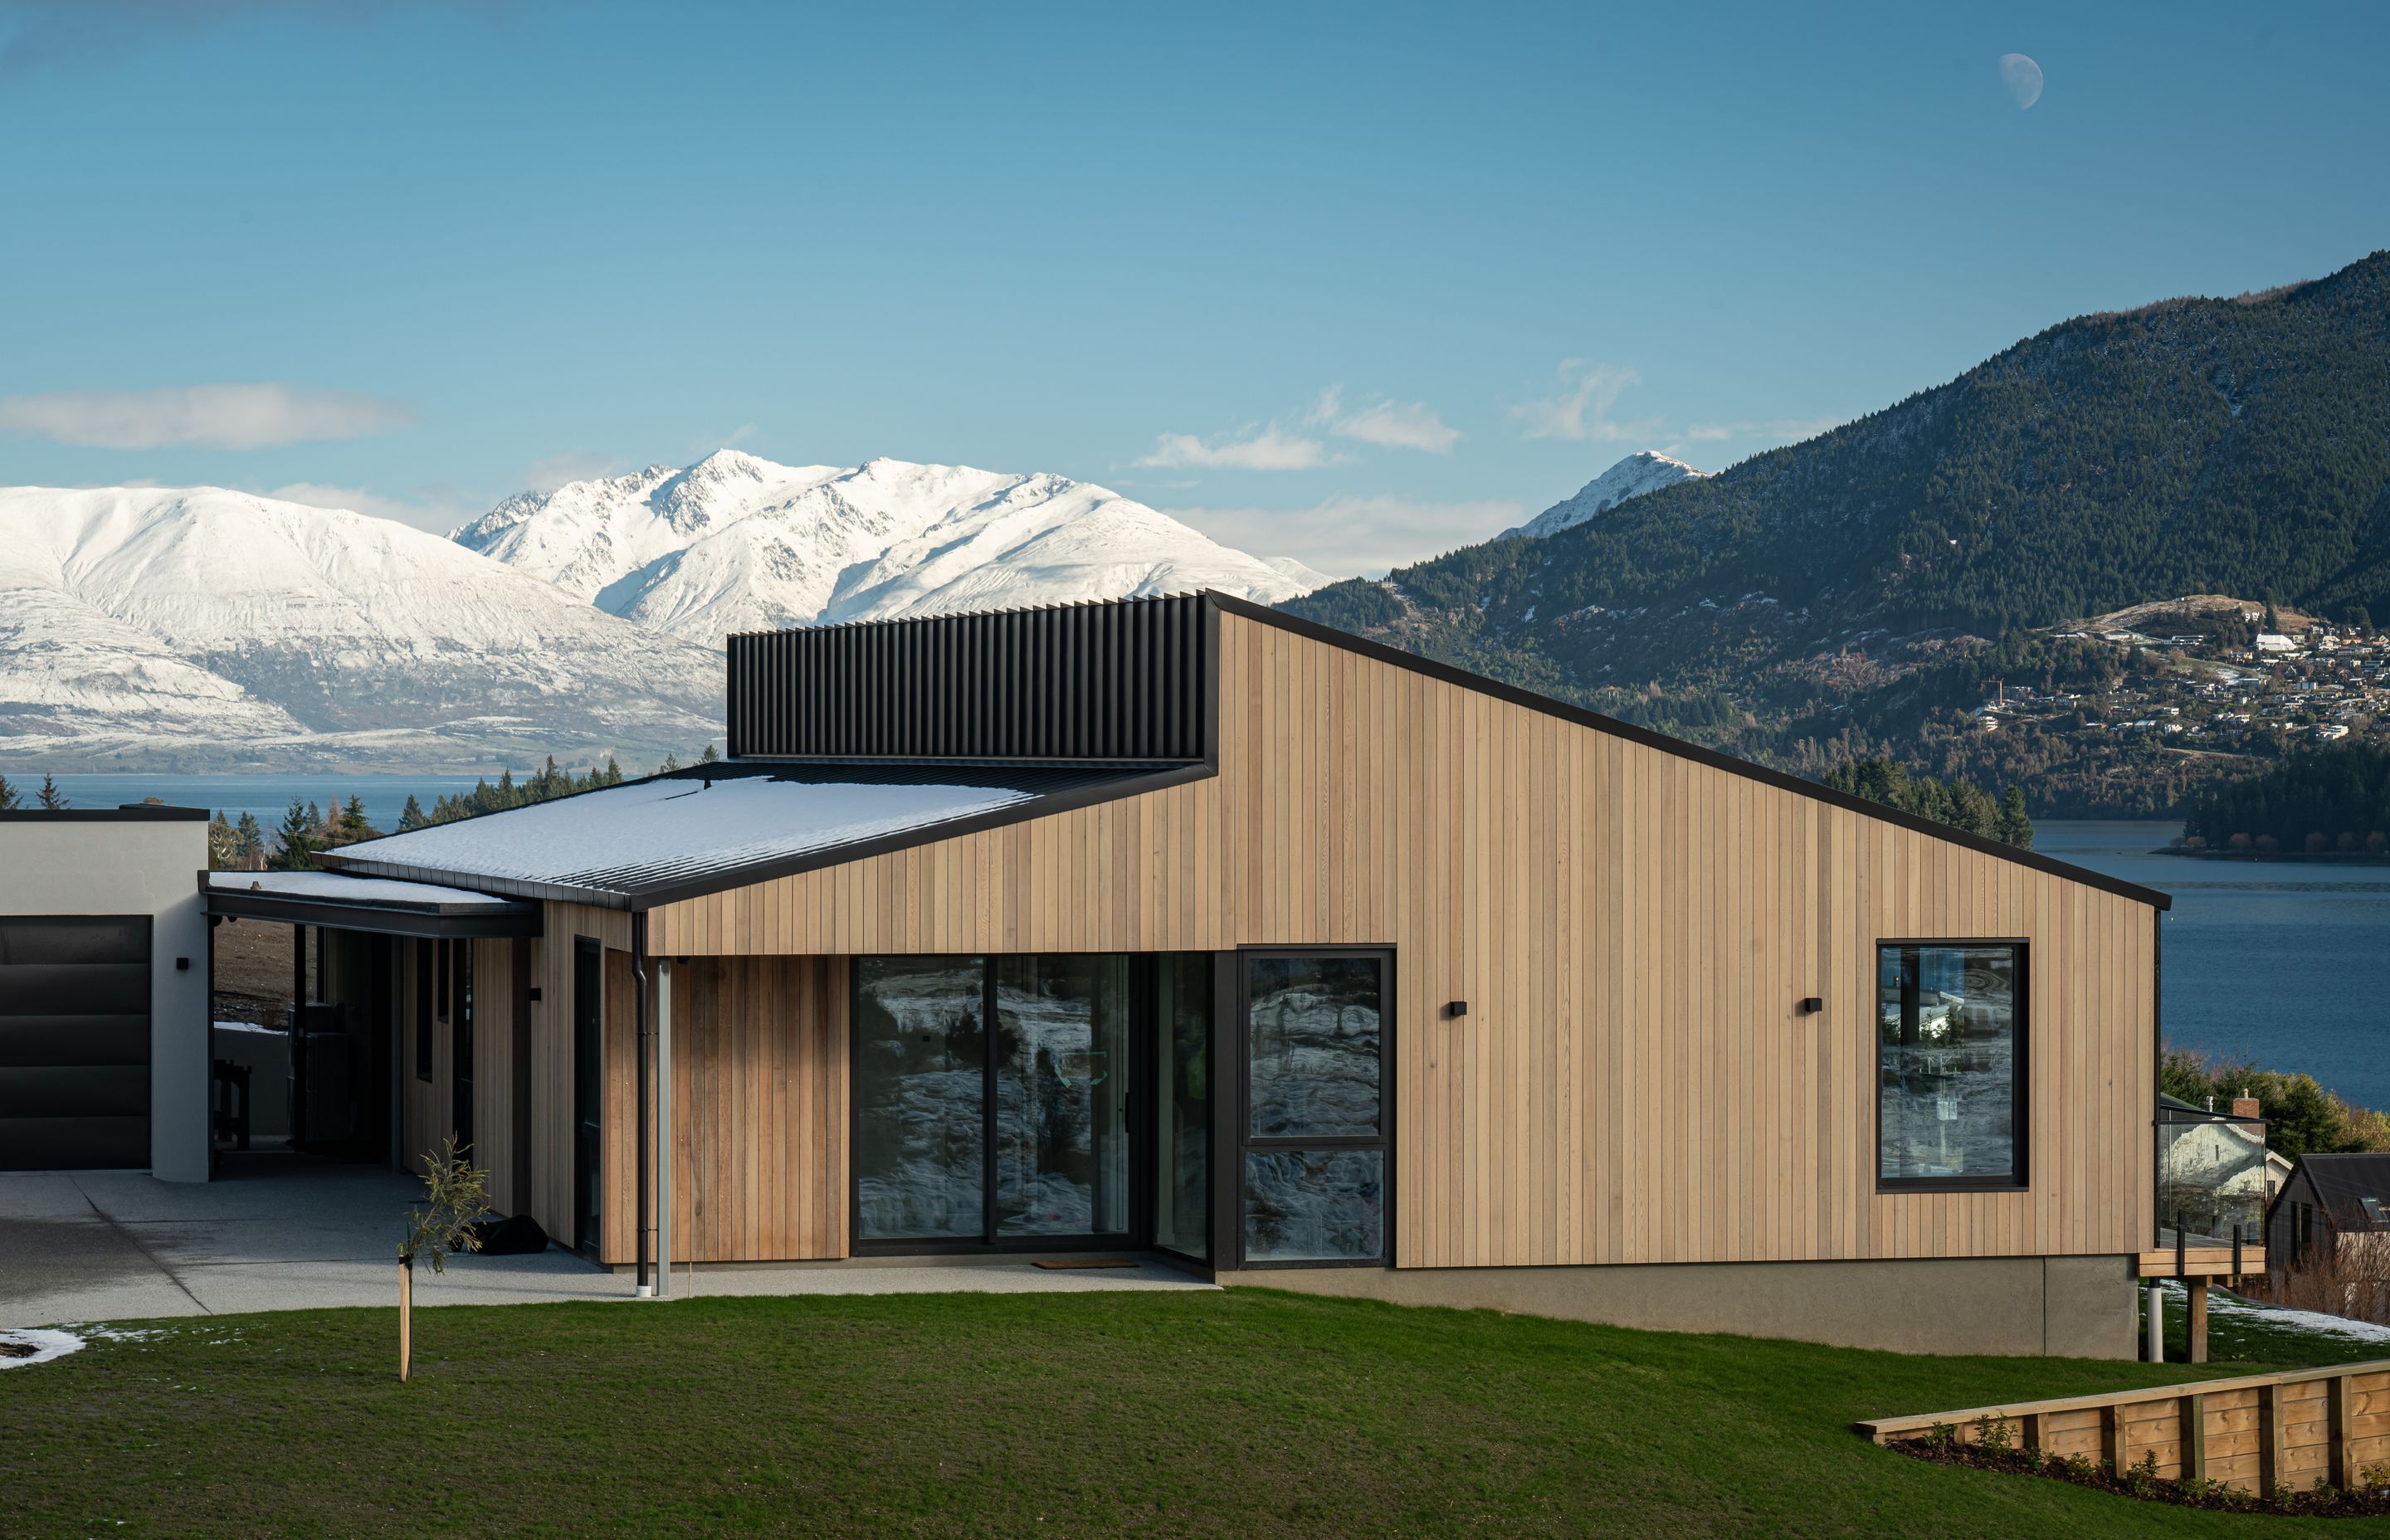 Peninsula House occupies a tricky site on a rocky outcrop overlooking Lake Wakatipu. This lakeside retreat is a modest, compact home that has a relaxed connection to its environment.